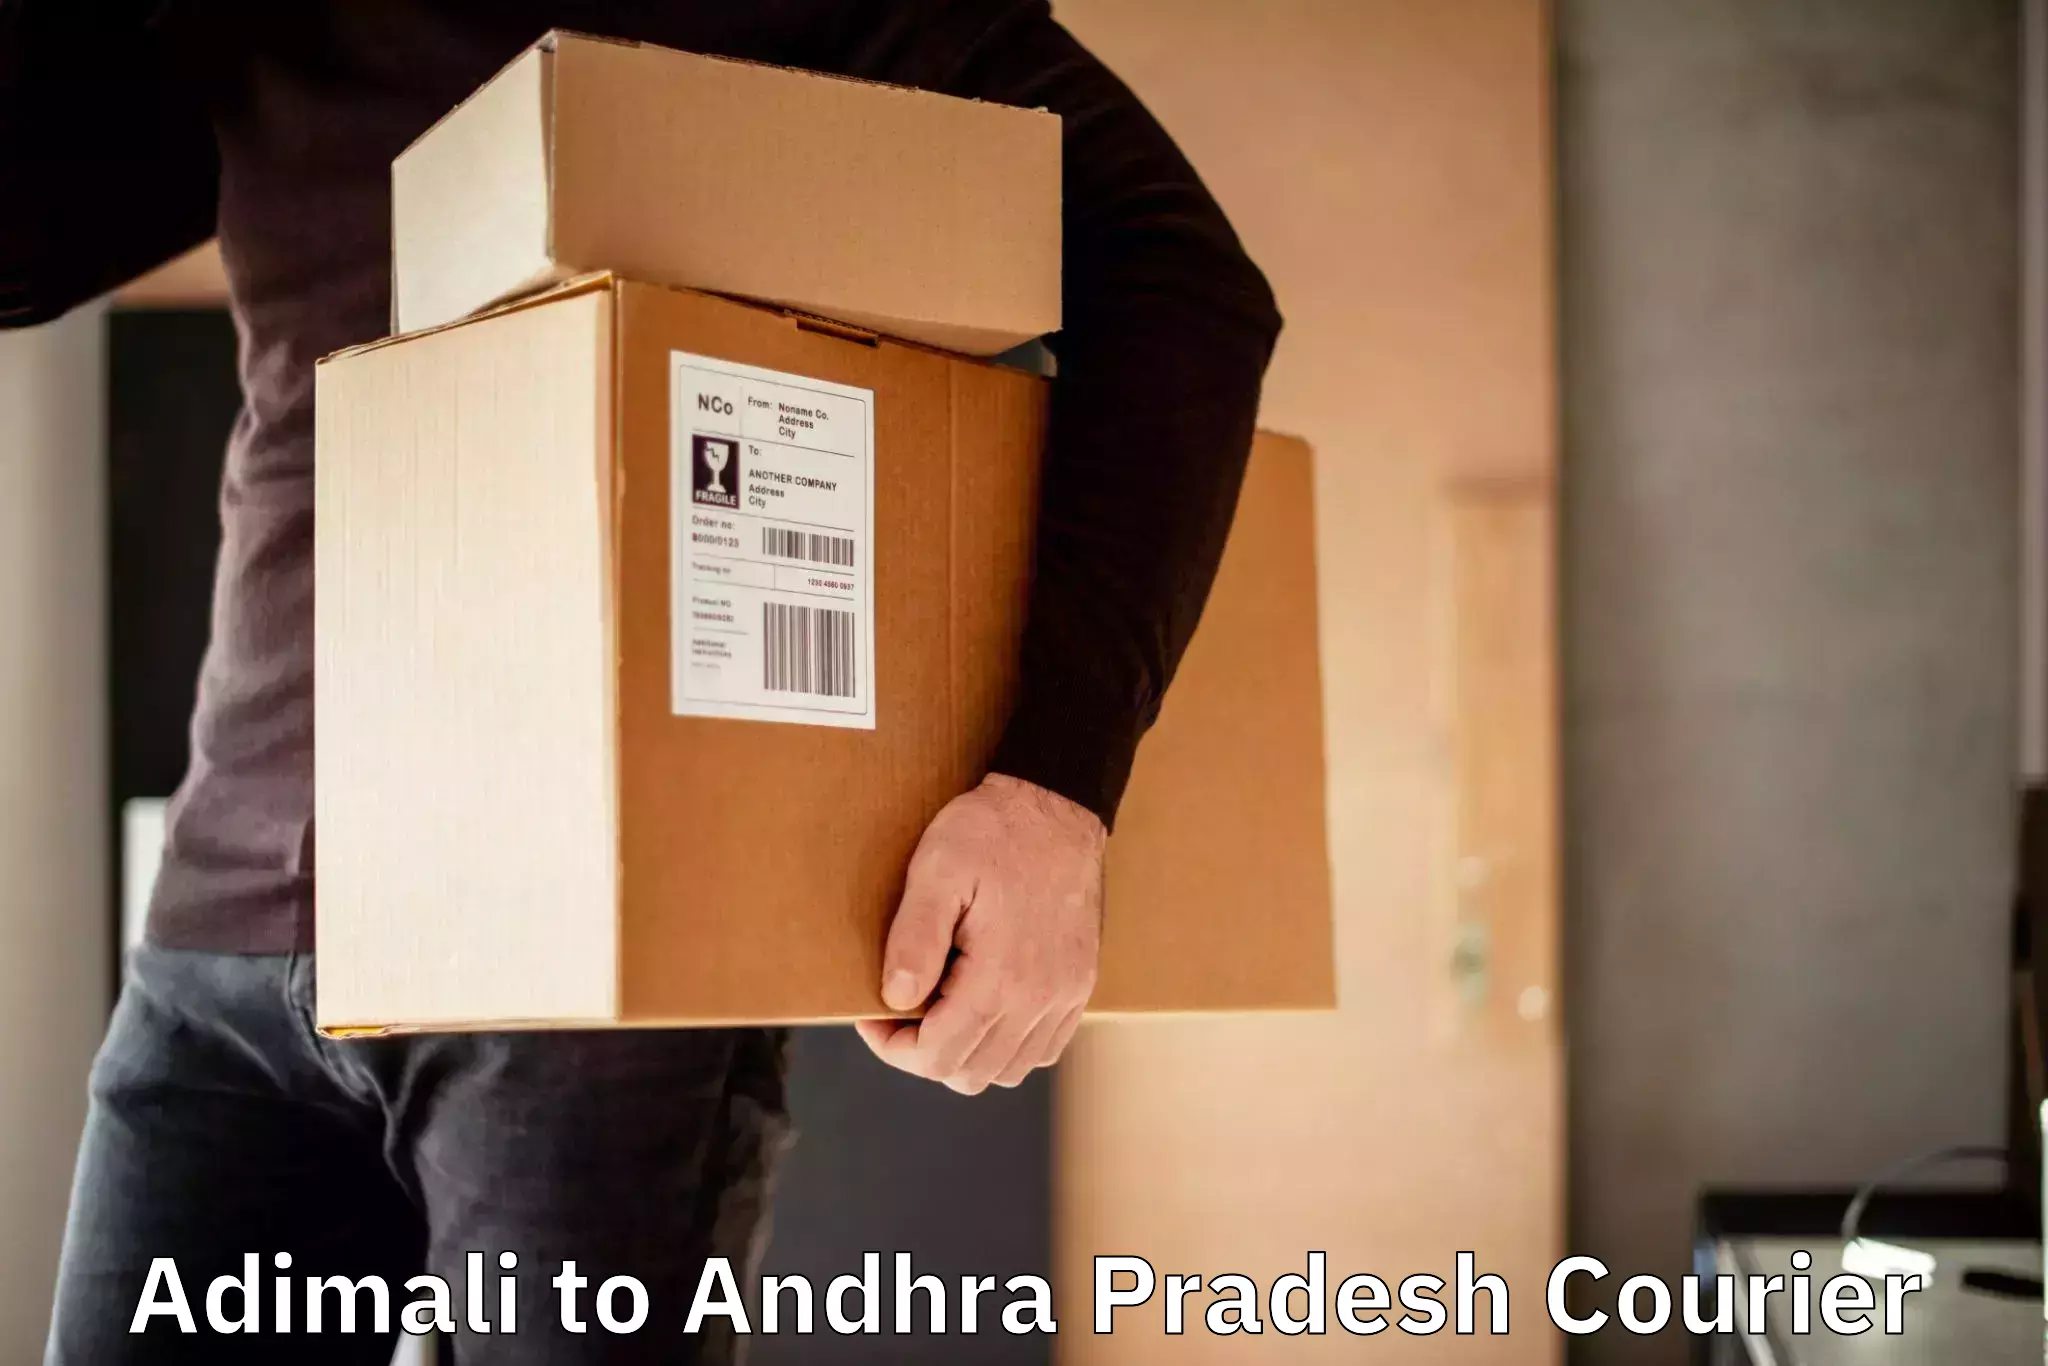 Specialized courier services Adimali to Visakhapatnam Port